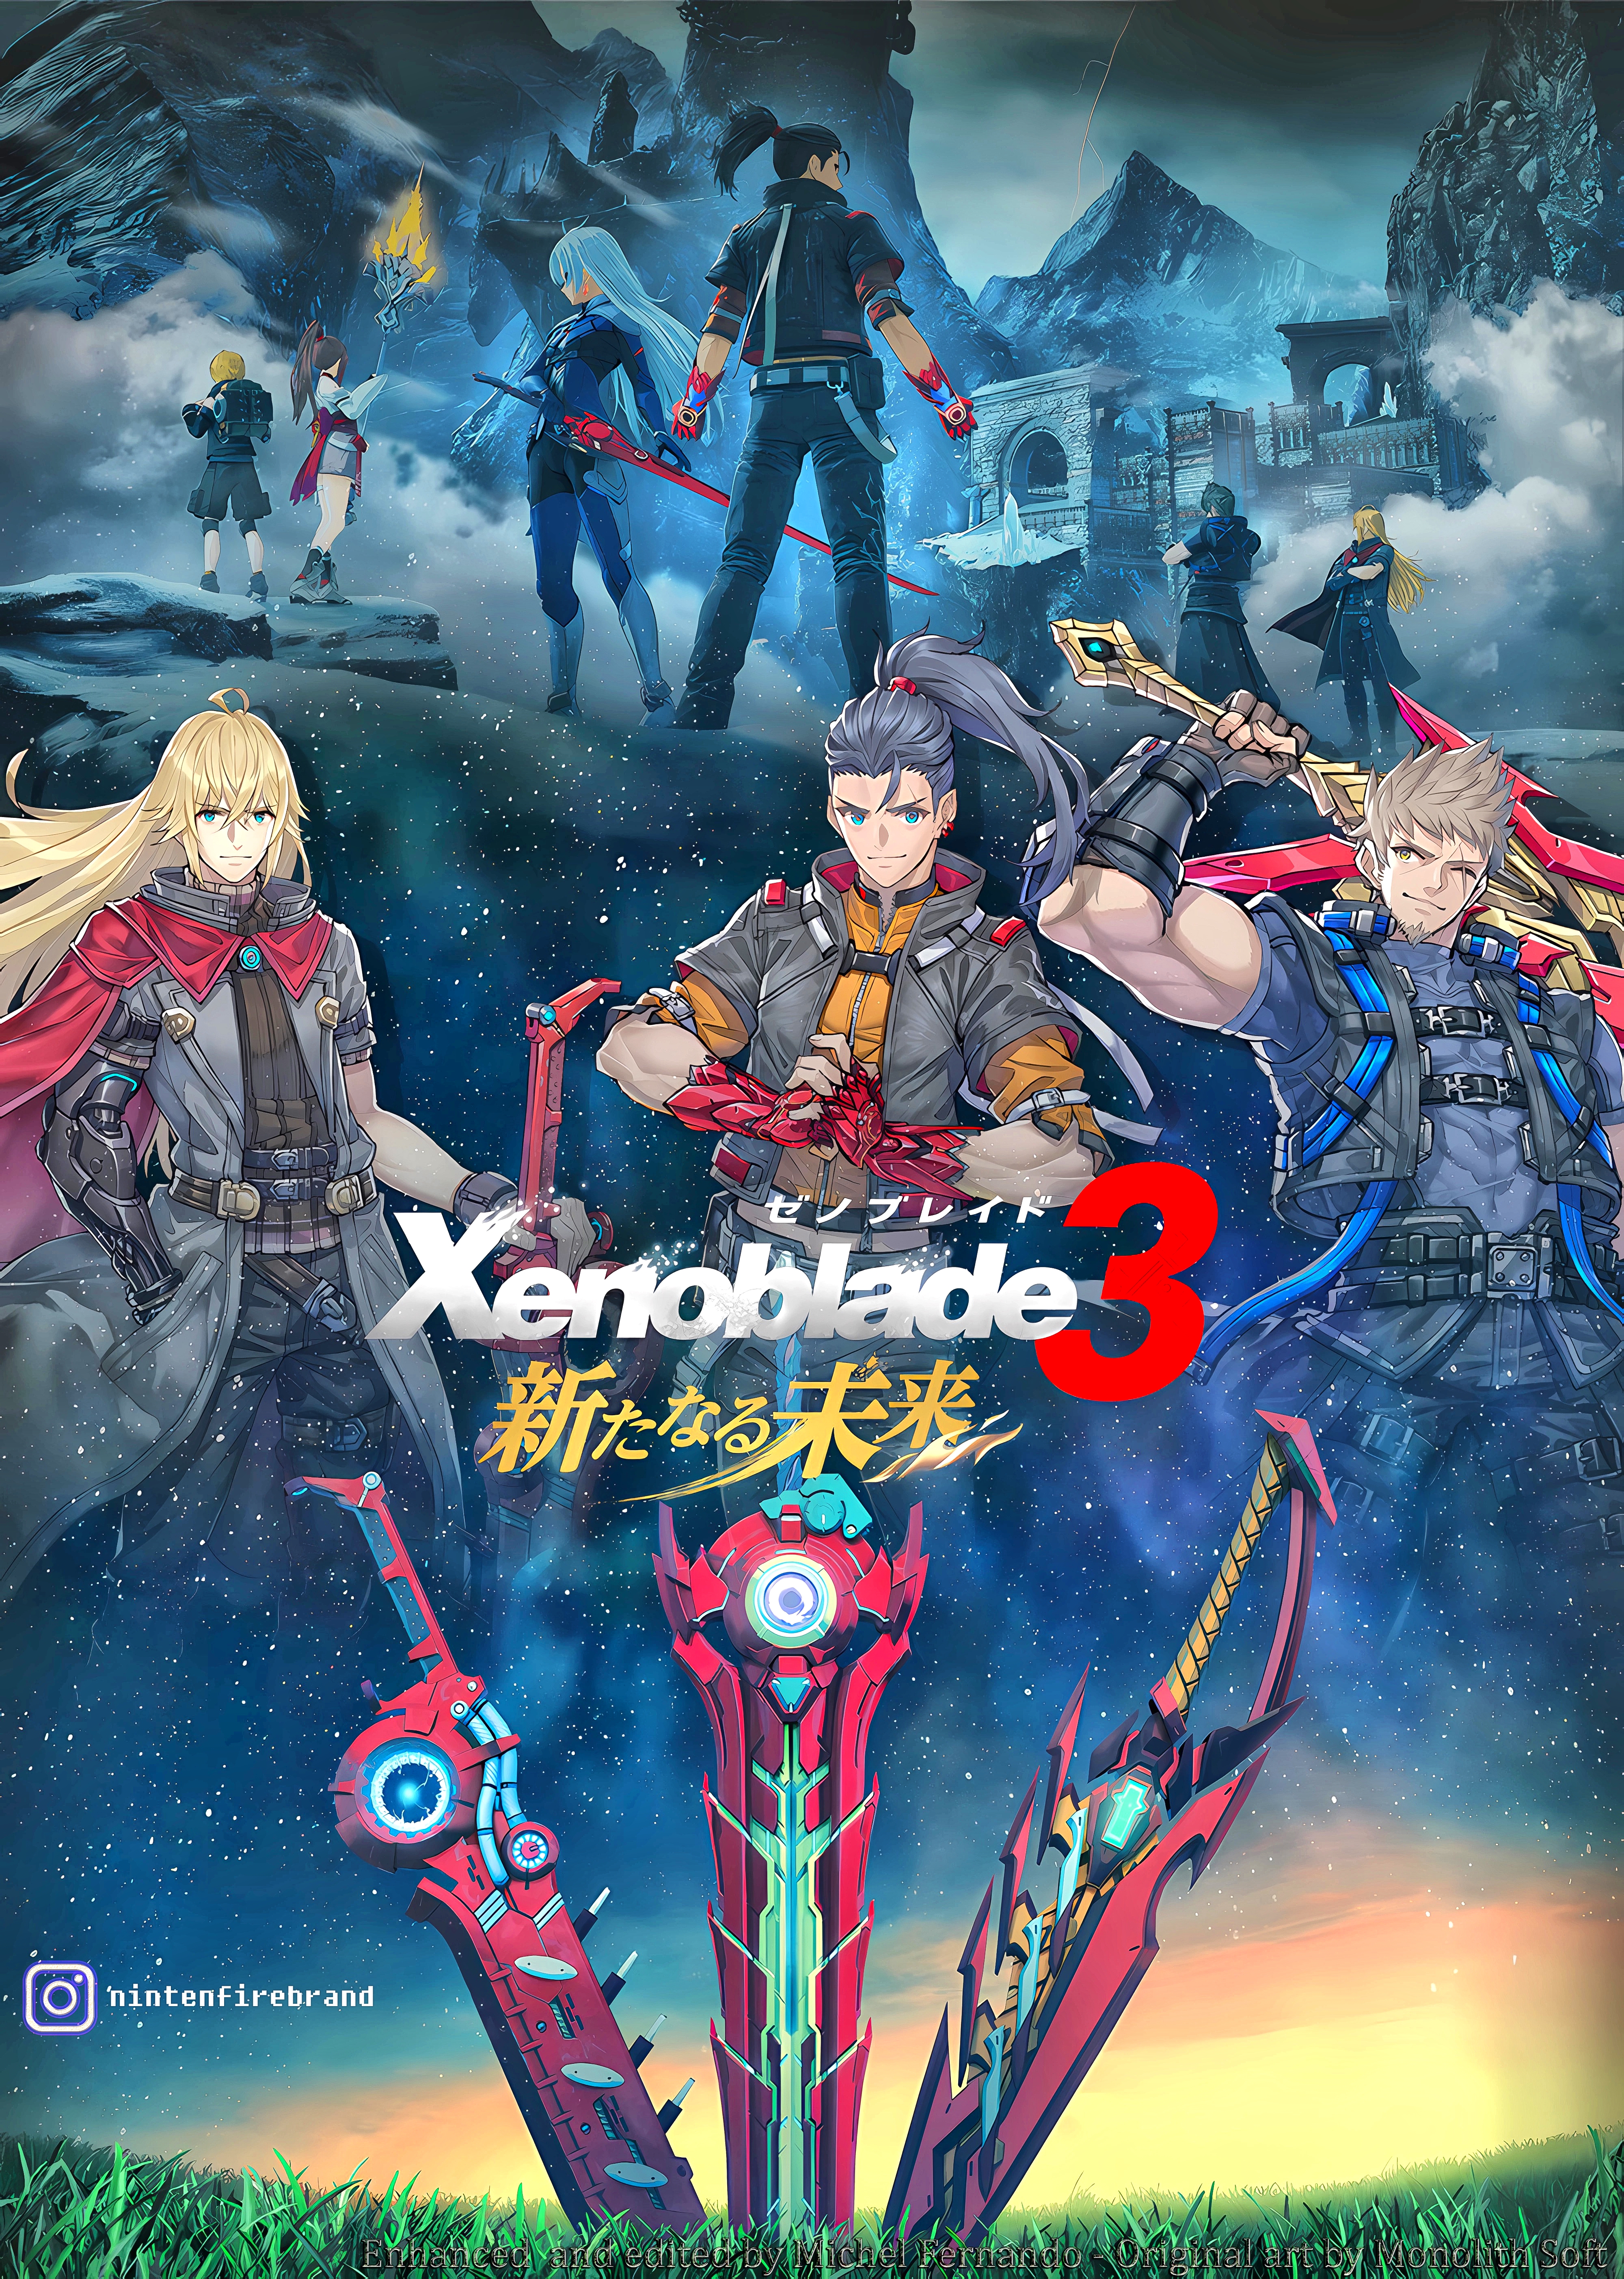 RPG Fan] Xenoblade Chronicles 3: Future Redeemed Review (92/100) :  r/NintendoSwitch